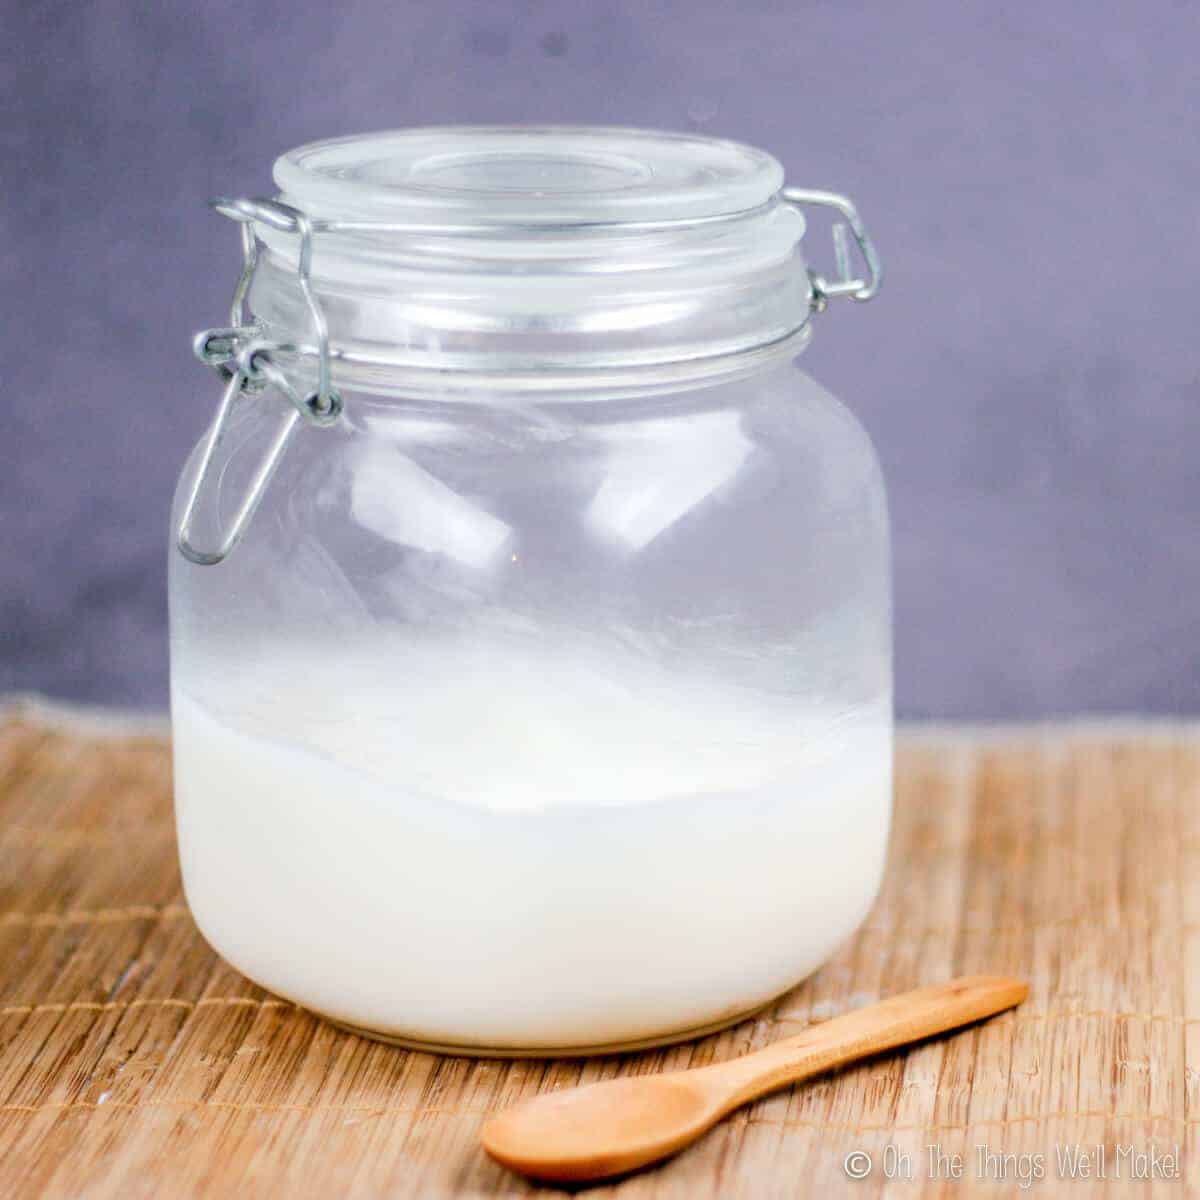 Large jar with home rendered lard and a wooden spoon in front of it.